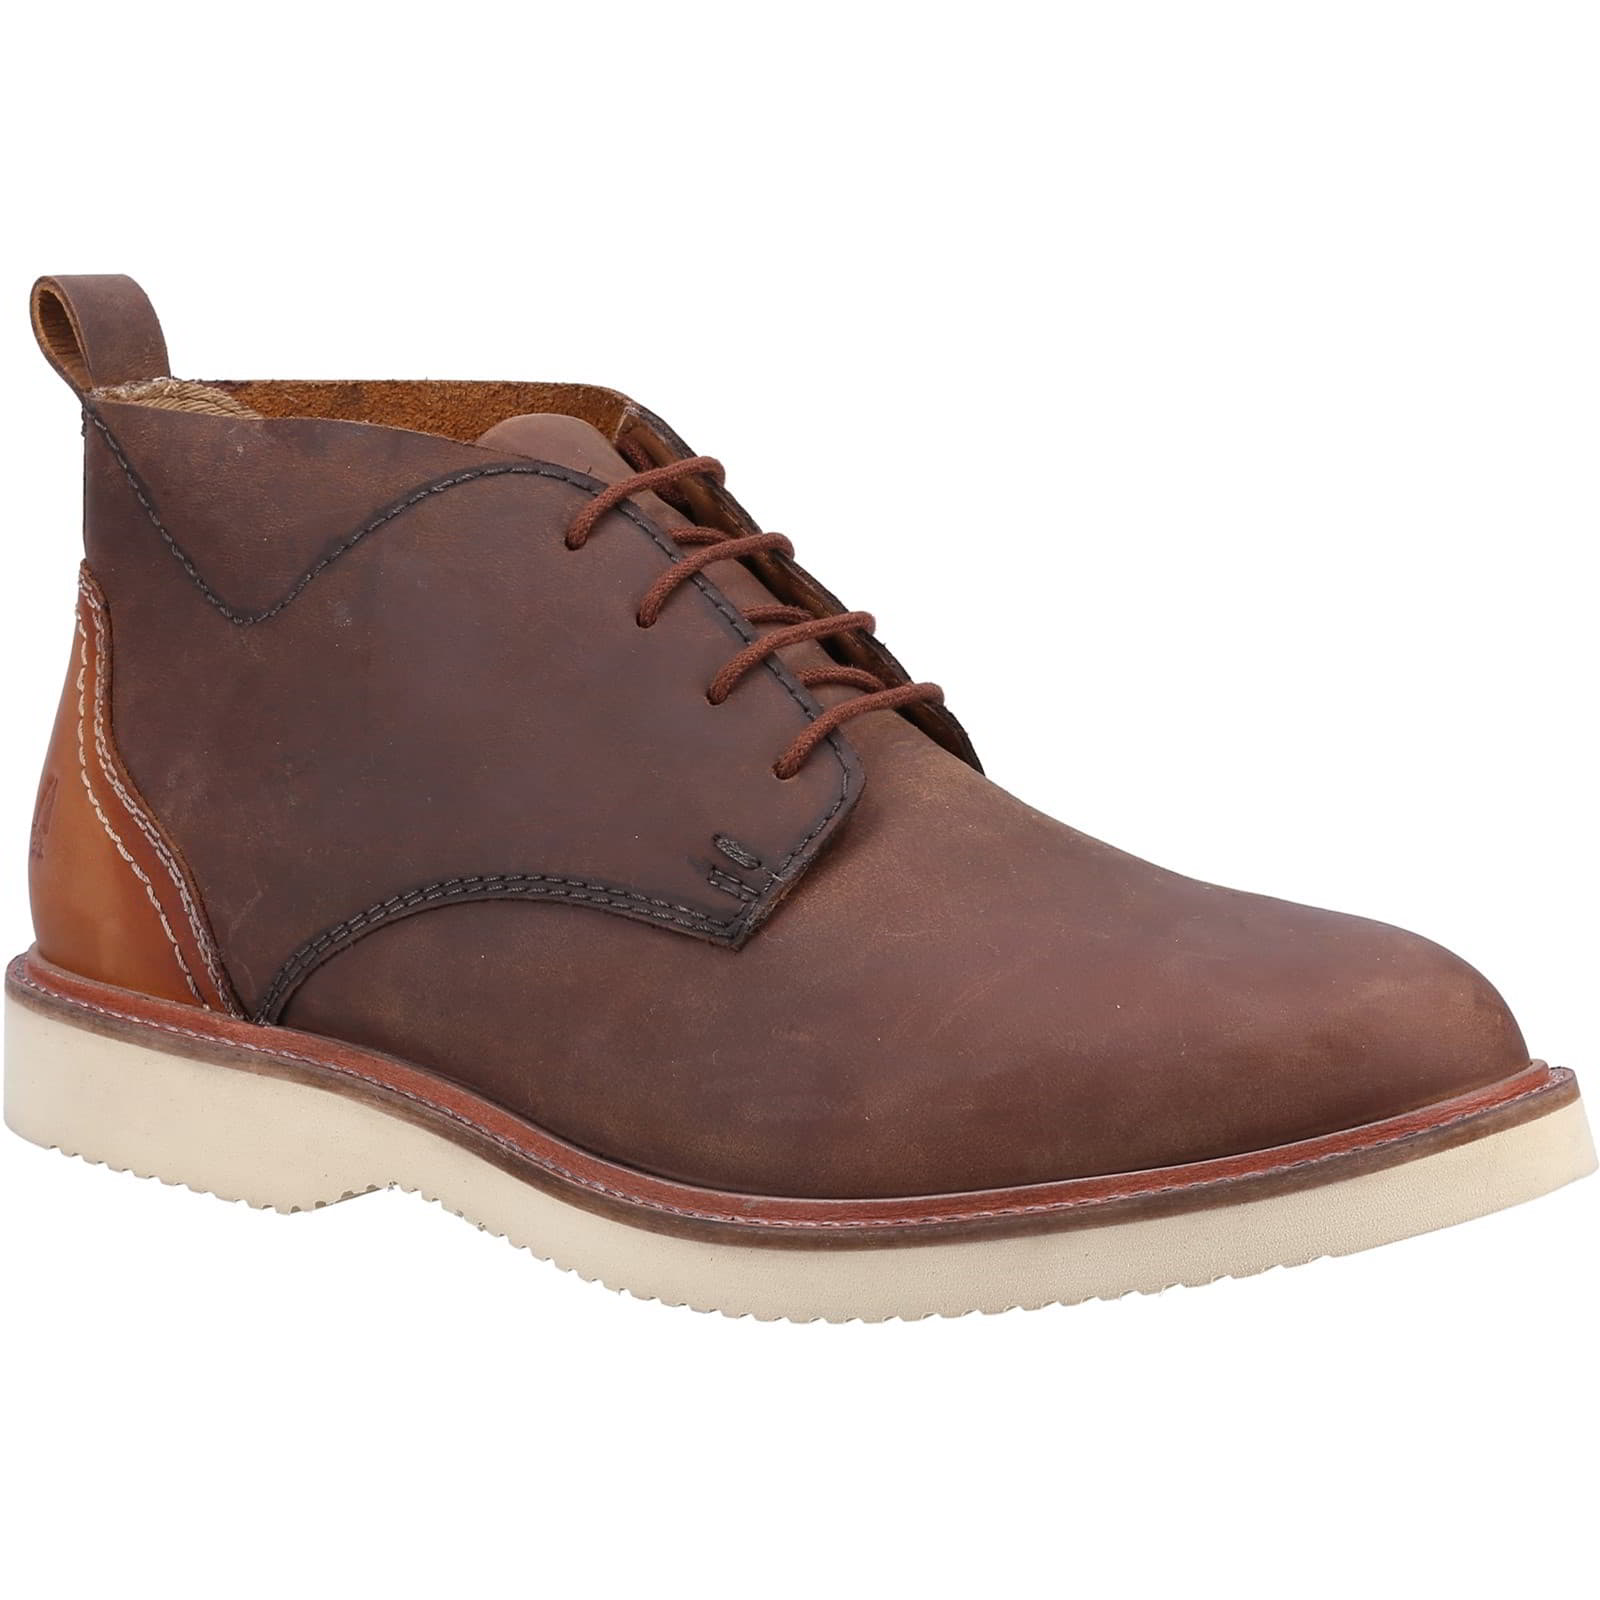 Hush Puppies Men's Wesley Lace UP Desert Chukka Ankle Boots - UK 10